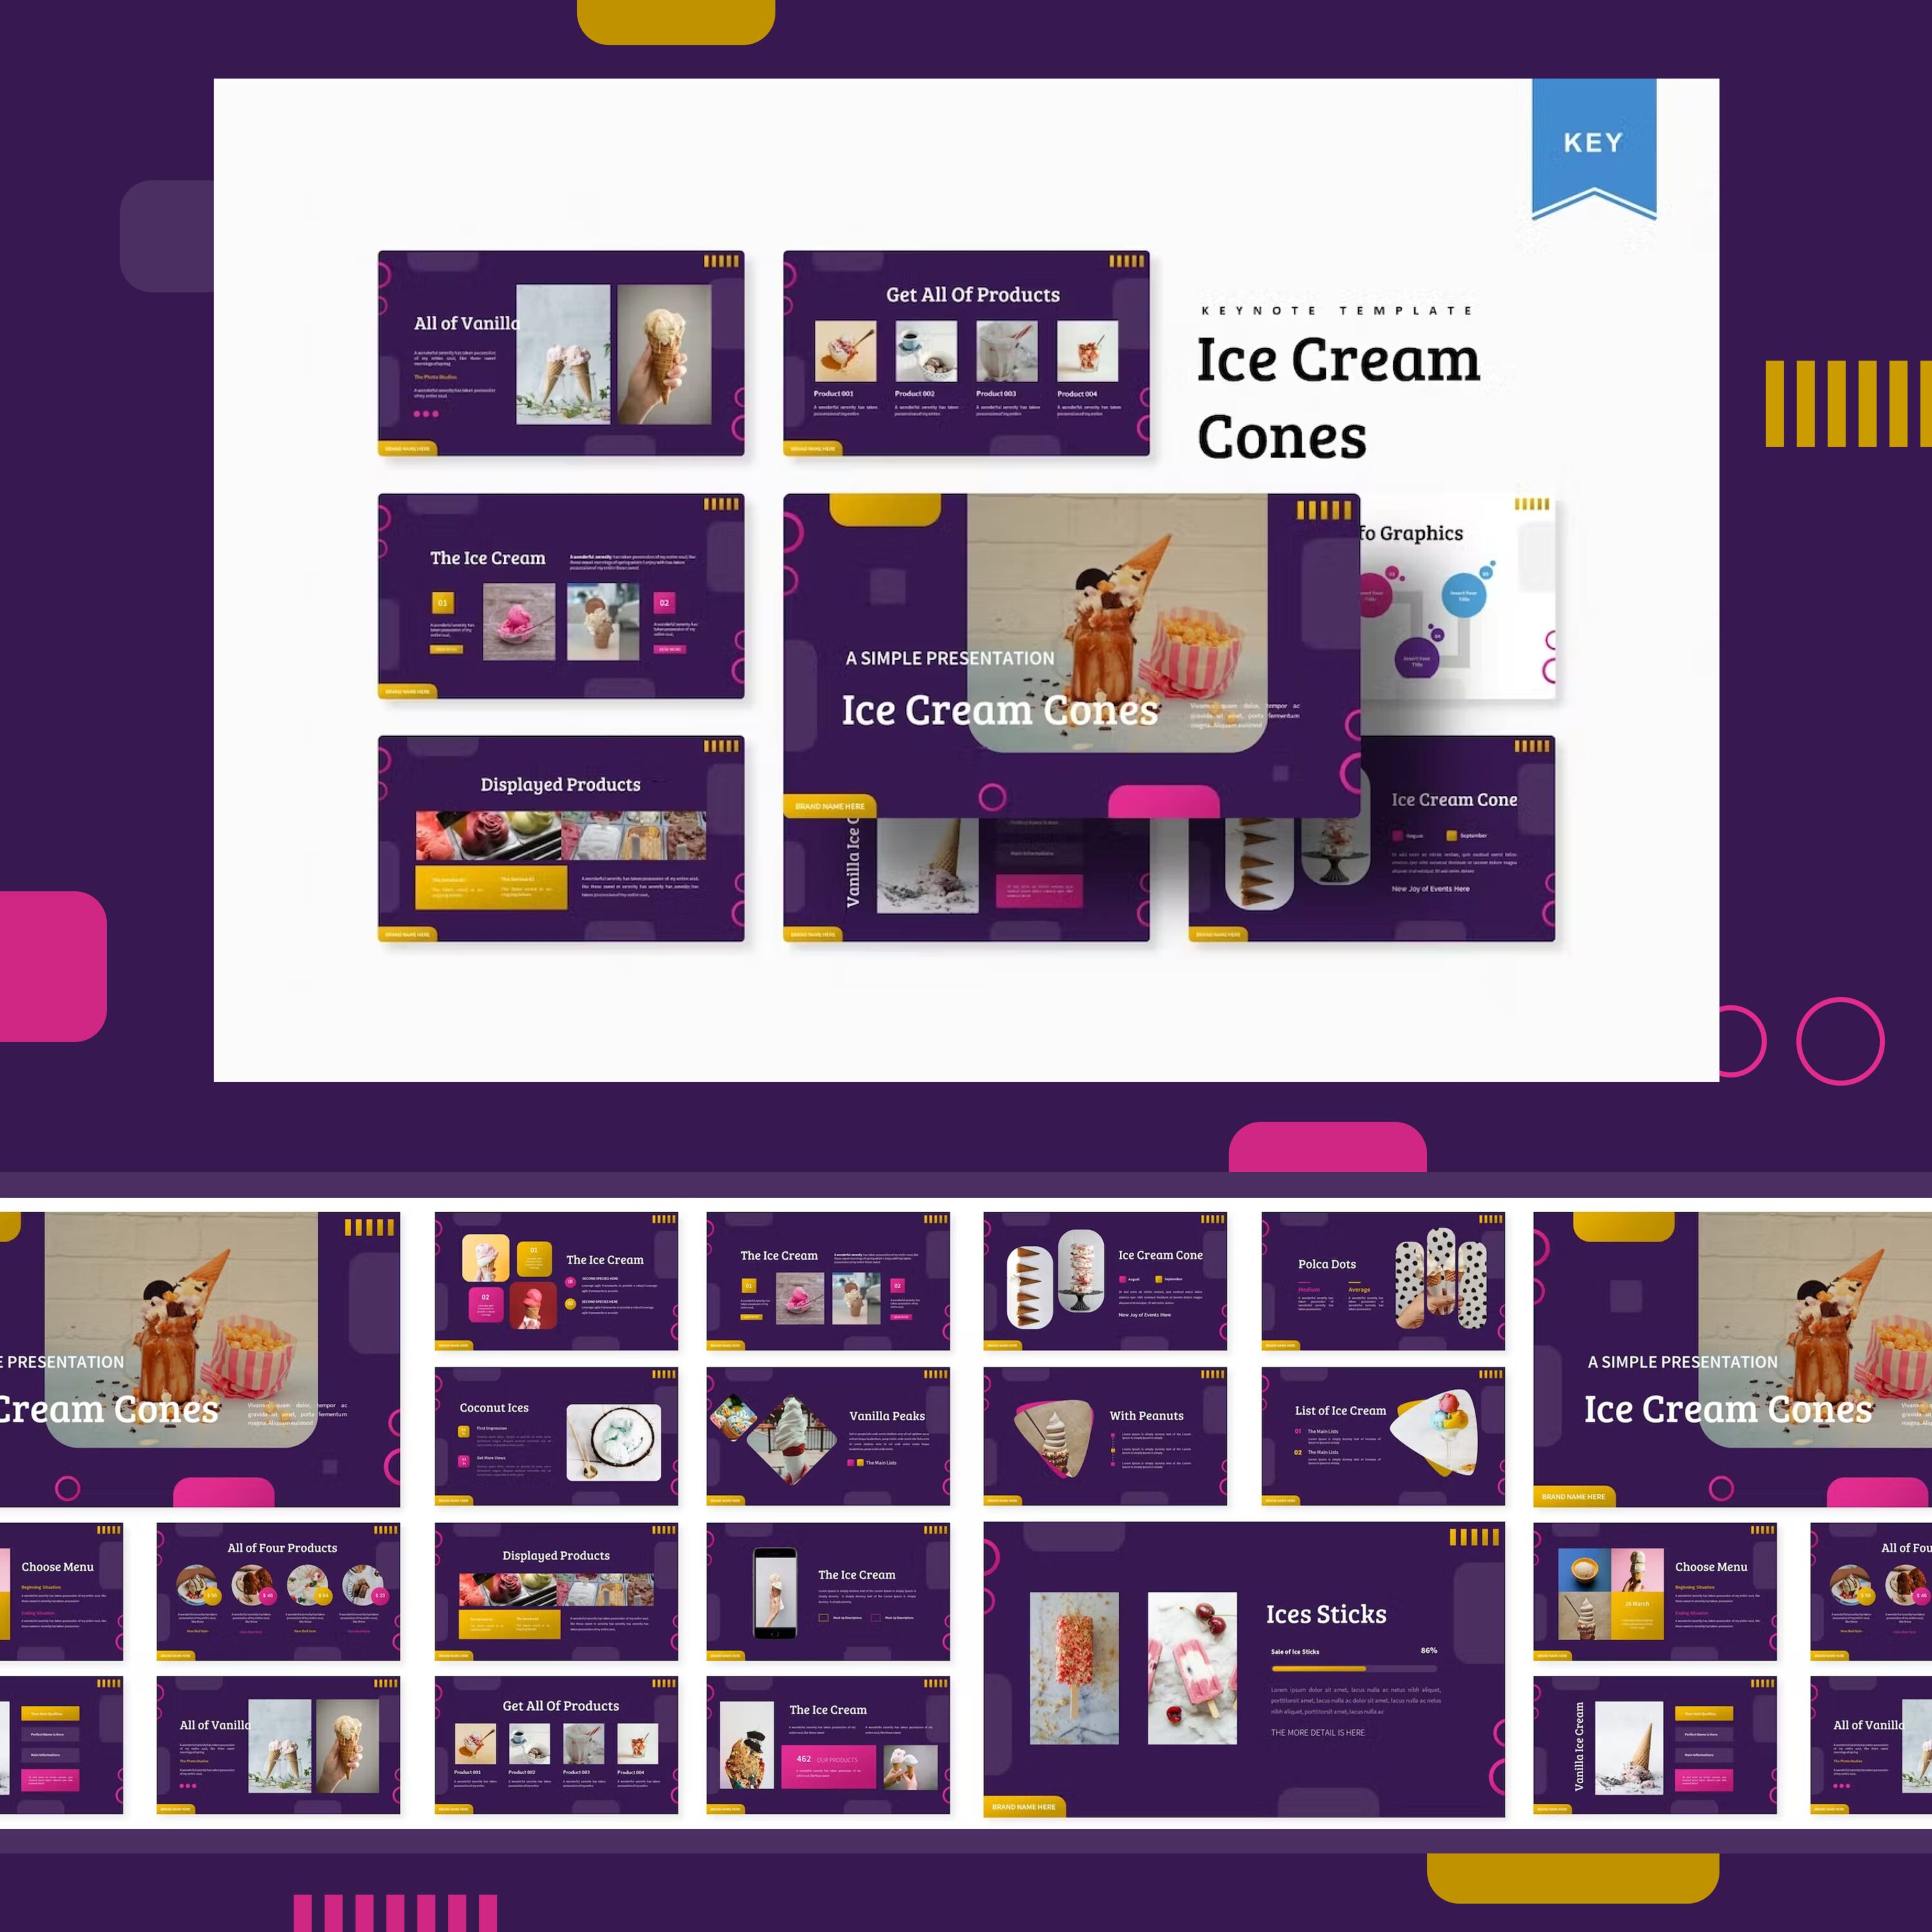 Preview ice cream cones keynote template.